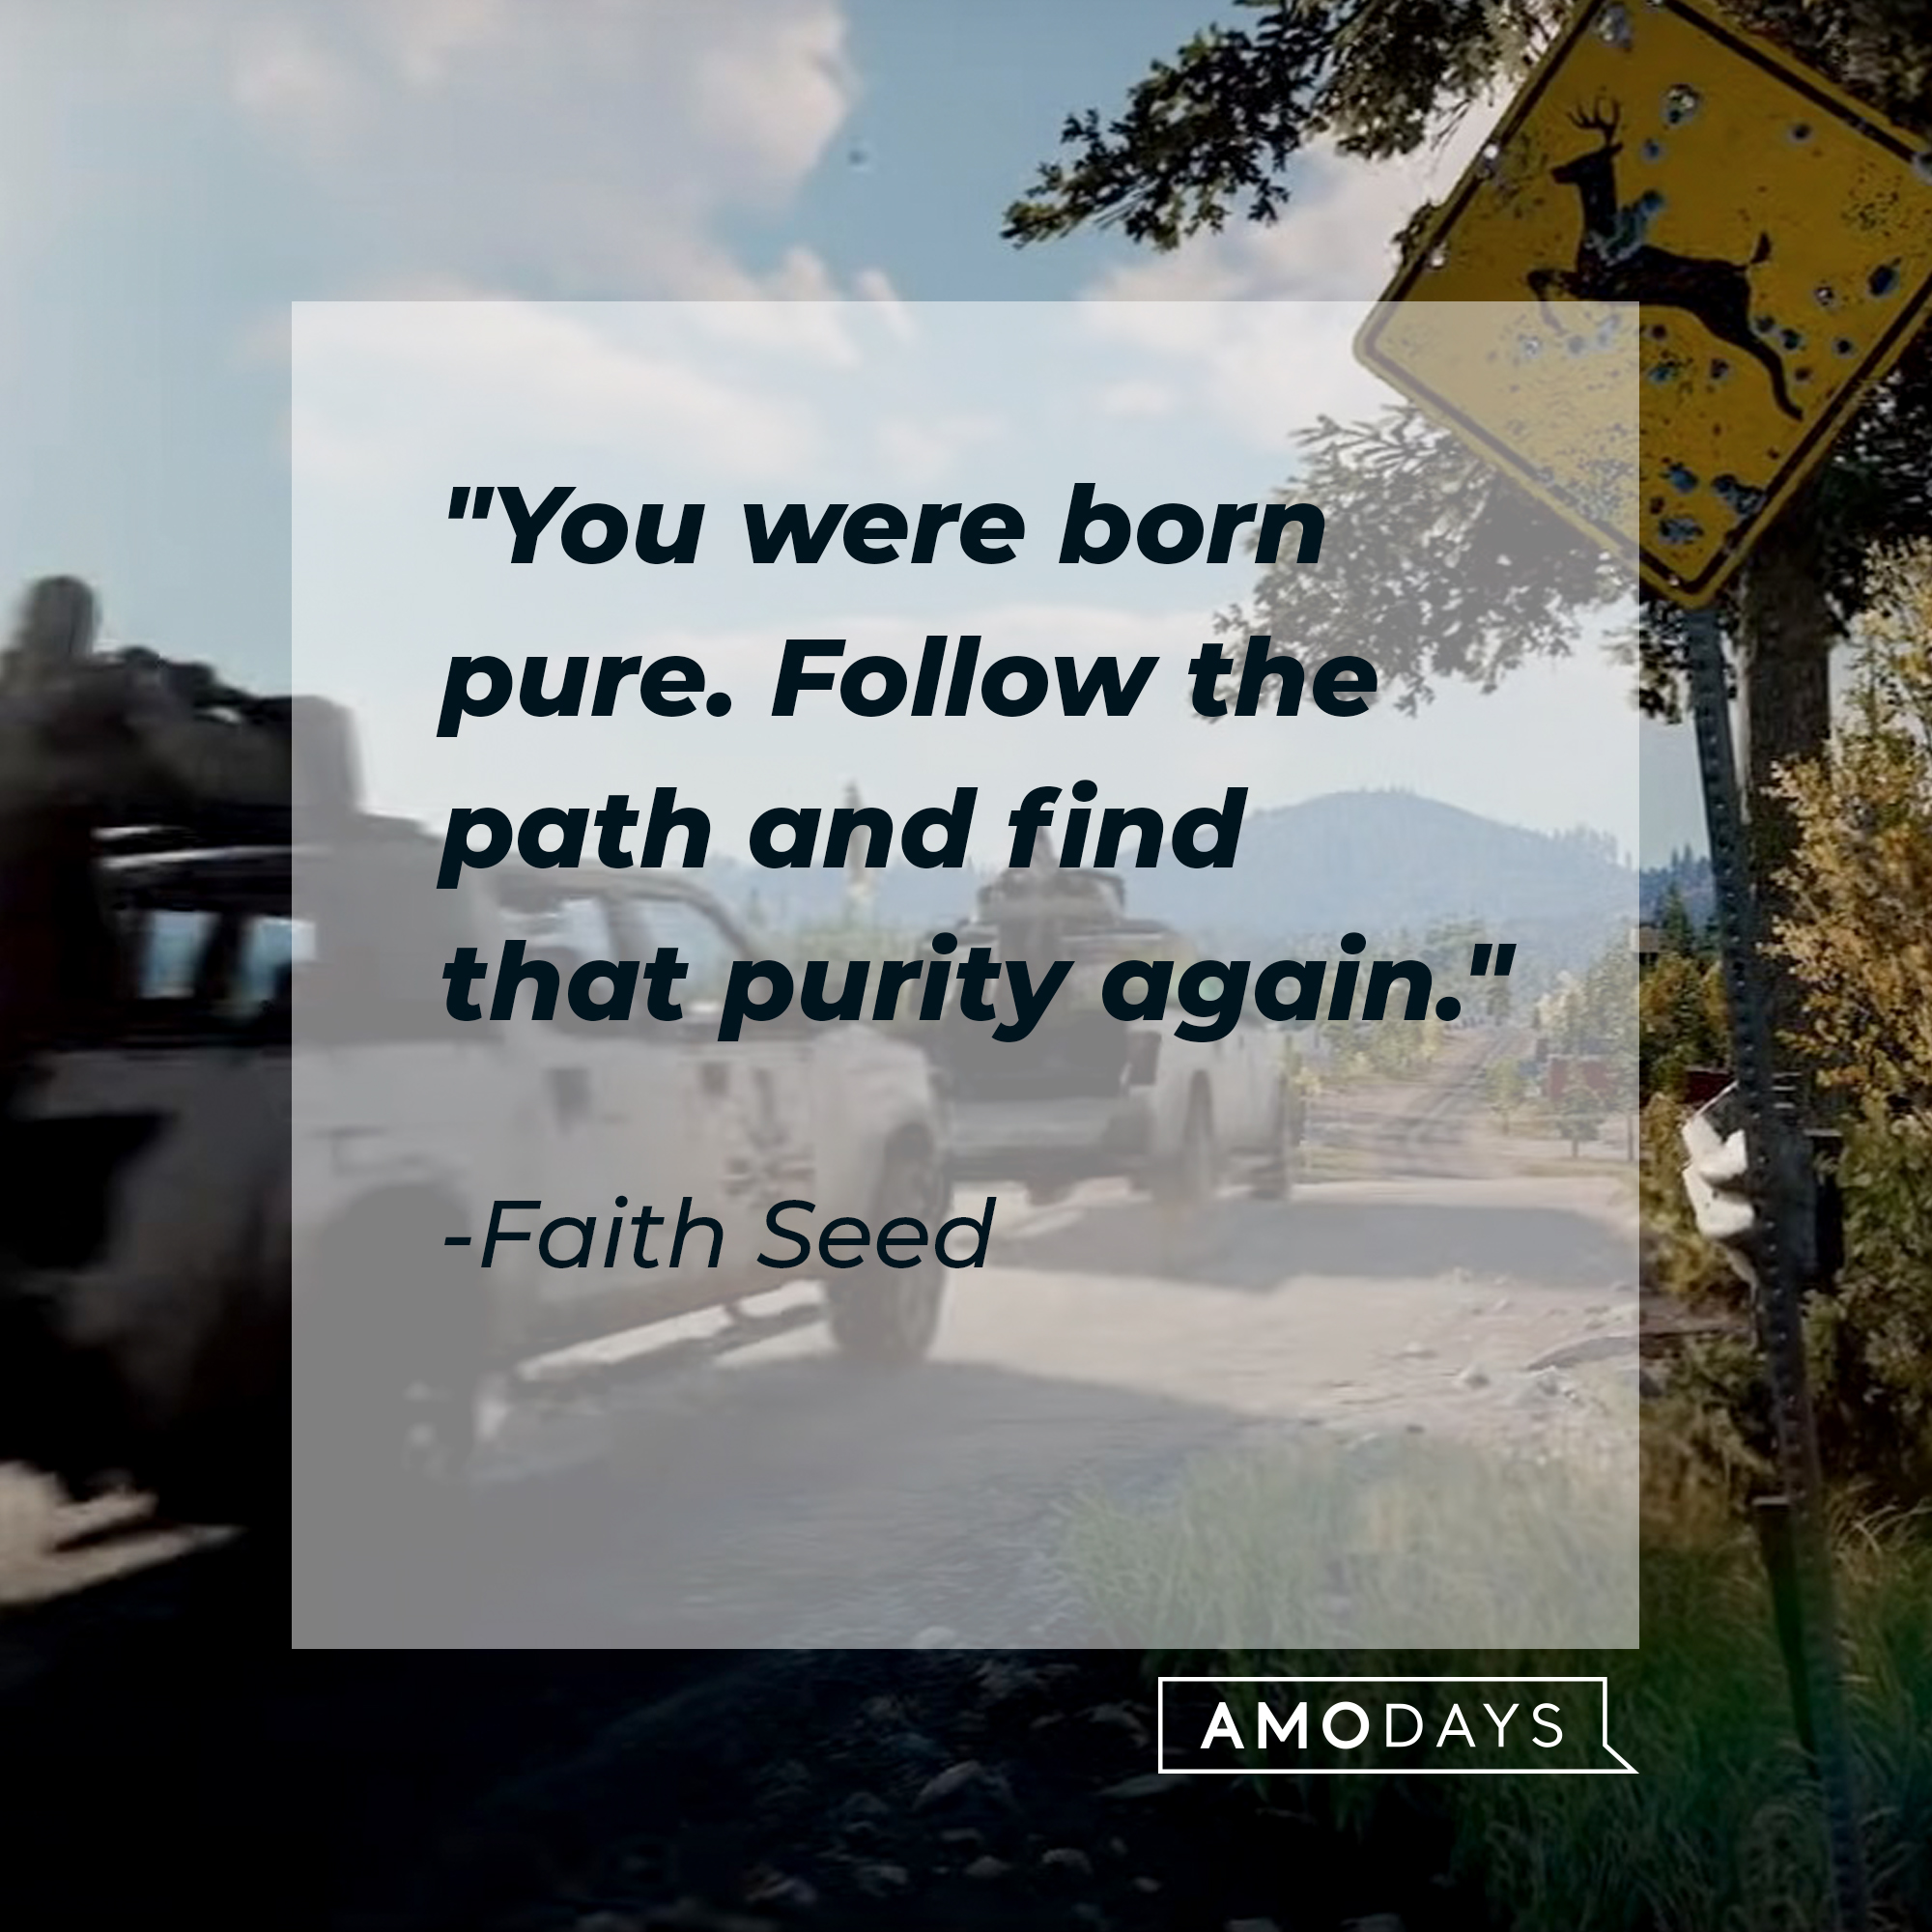 An image of "Far Cry 5" with Faith Seed's quote: "You were born pure. Follow the path and find that purity again." | Source: youtube.com/Ubisoft North America